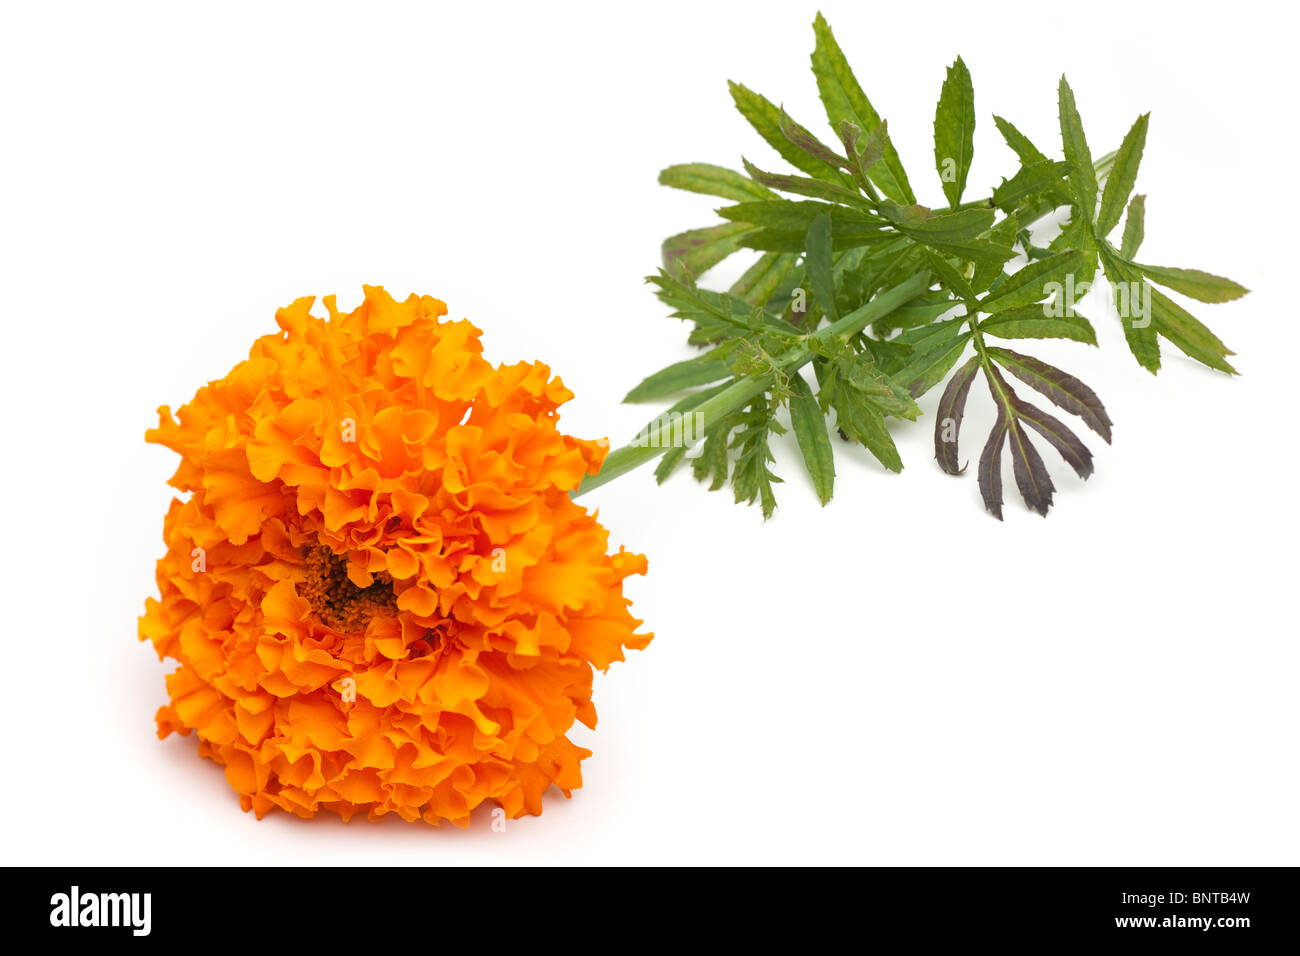 African marigold flower stem and leaves Stock Photo